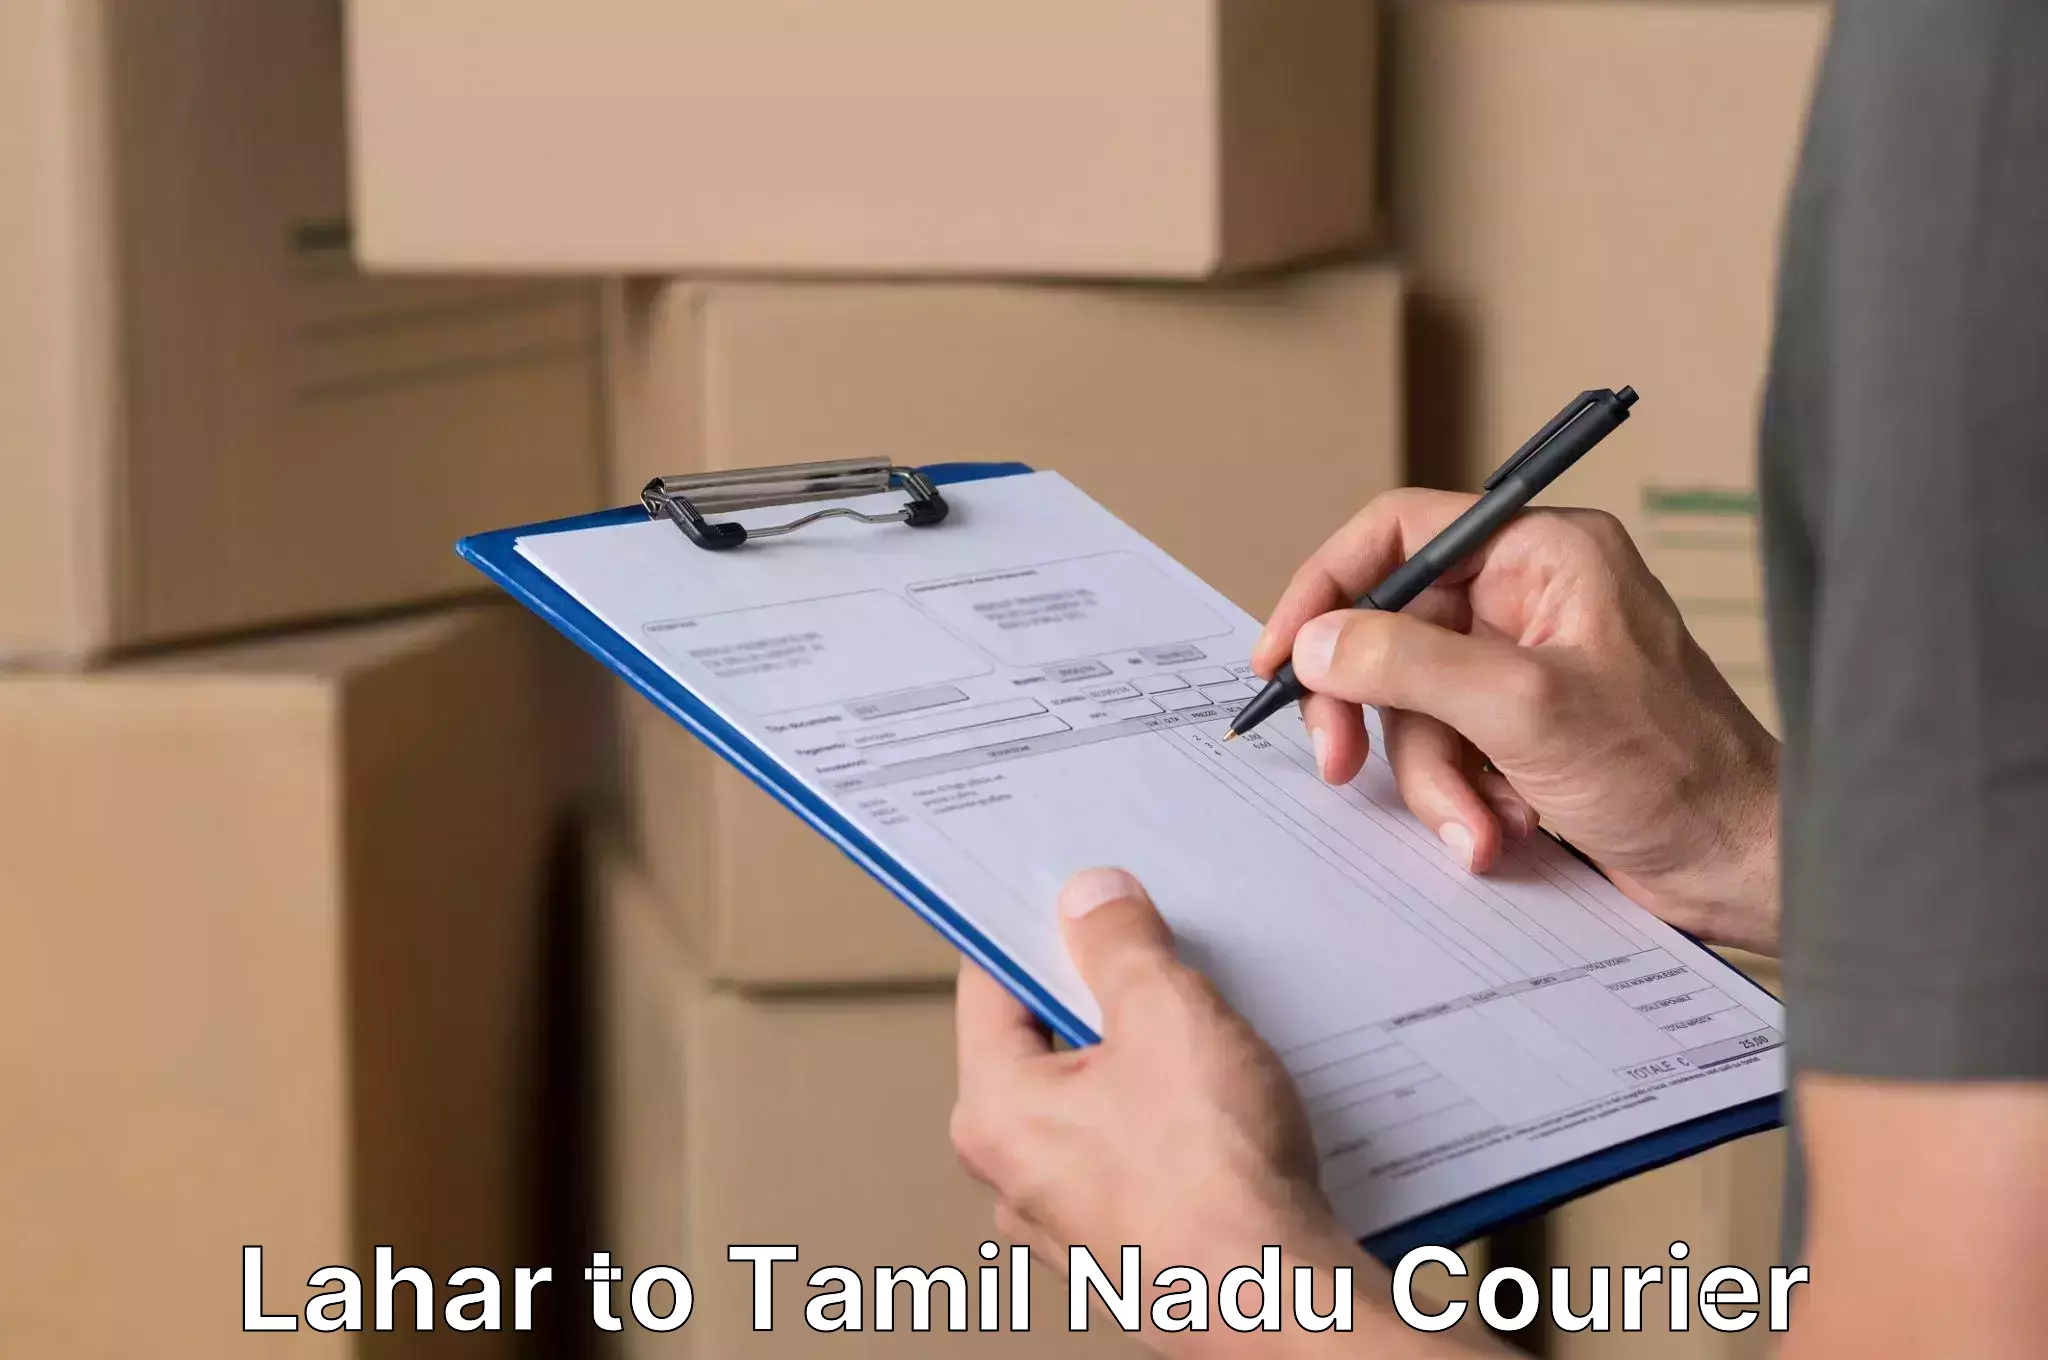 Quick household relocation Lahar to Tamil Nadu